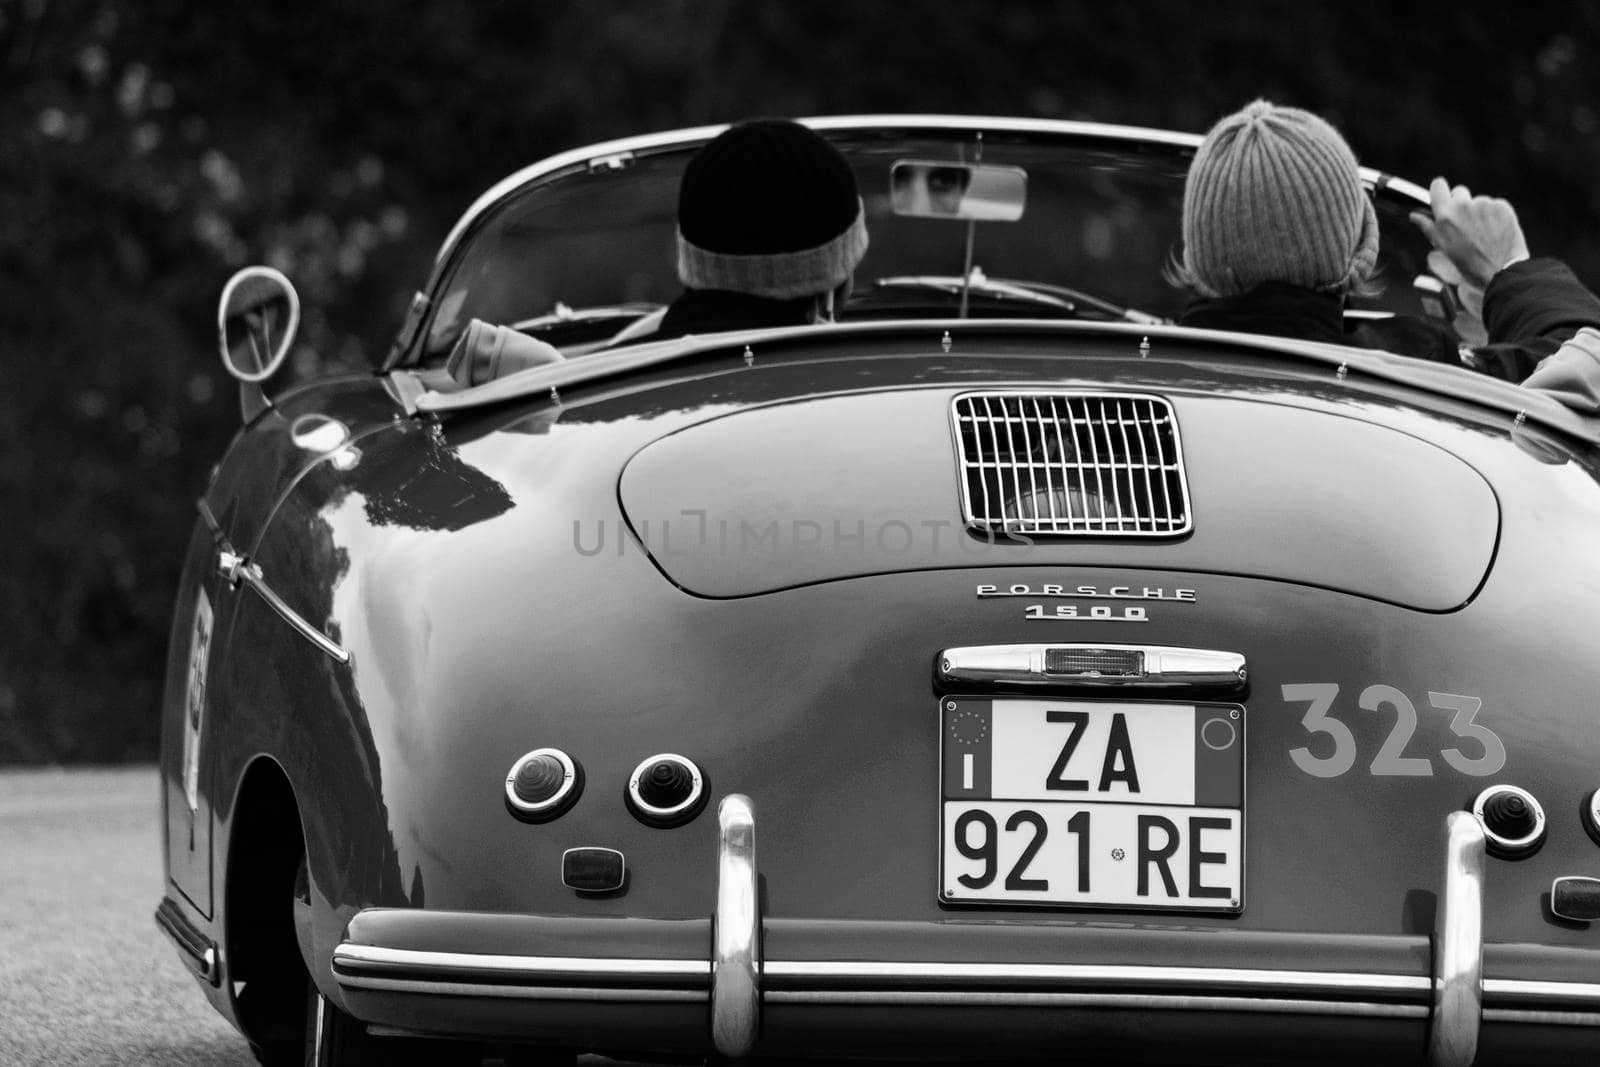 PORSCHE 356 1500 SPEEDSTER 1955 on an old racing car in rally Mille Miglia 2020 the famous italian historical race (1927-1957 by massimocampanari